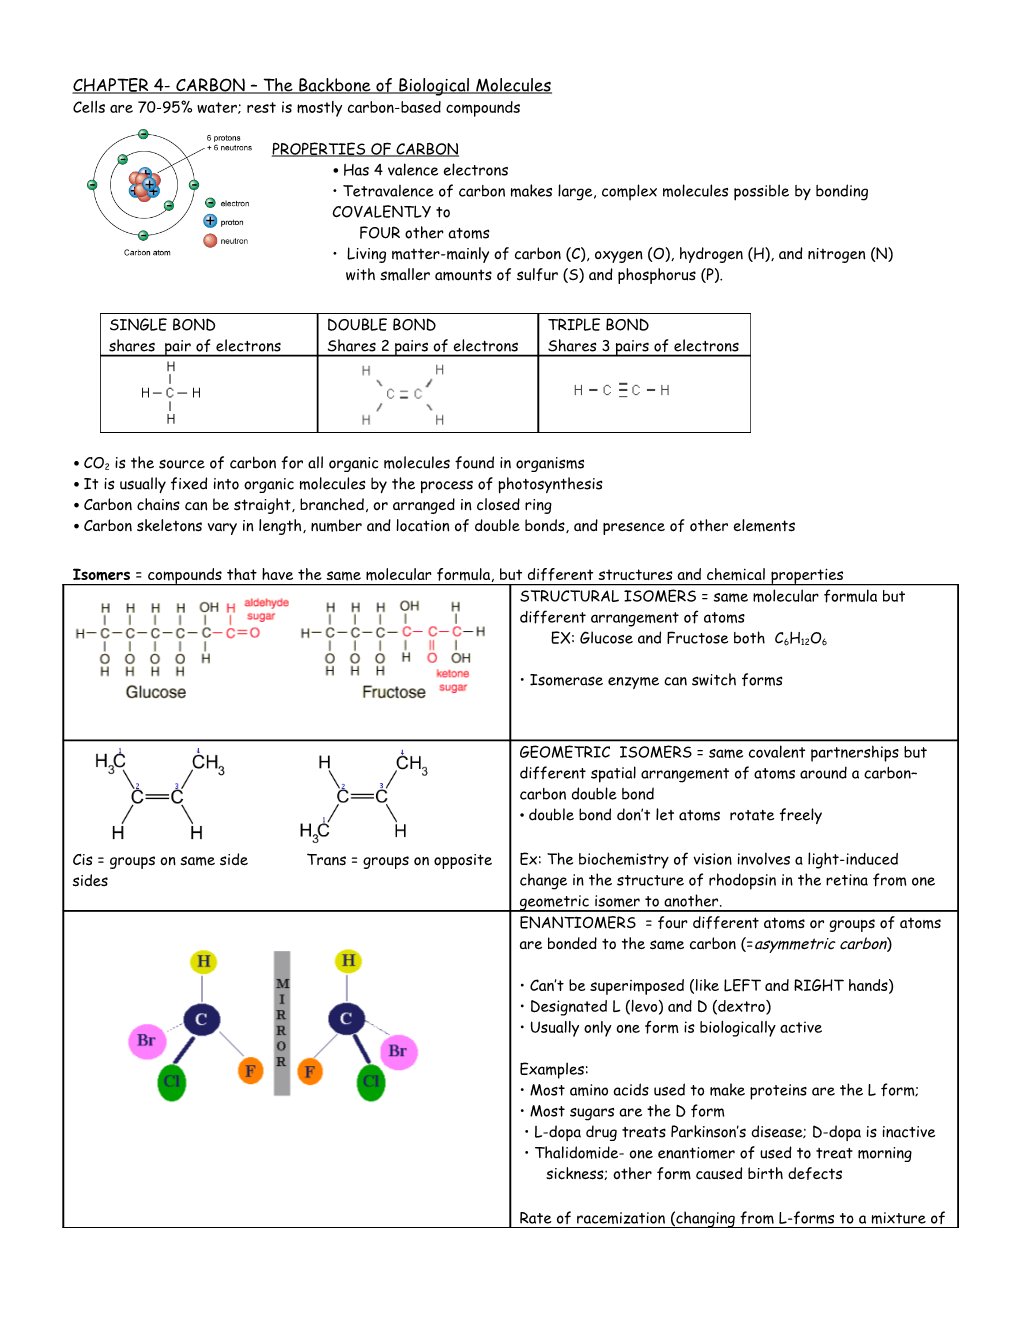 CHAPTER 4- CARBON the Backbone of Biological Molecules